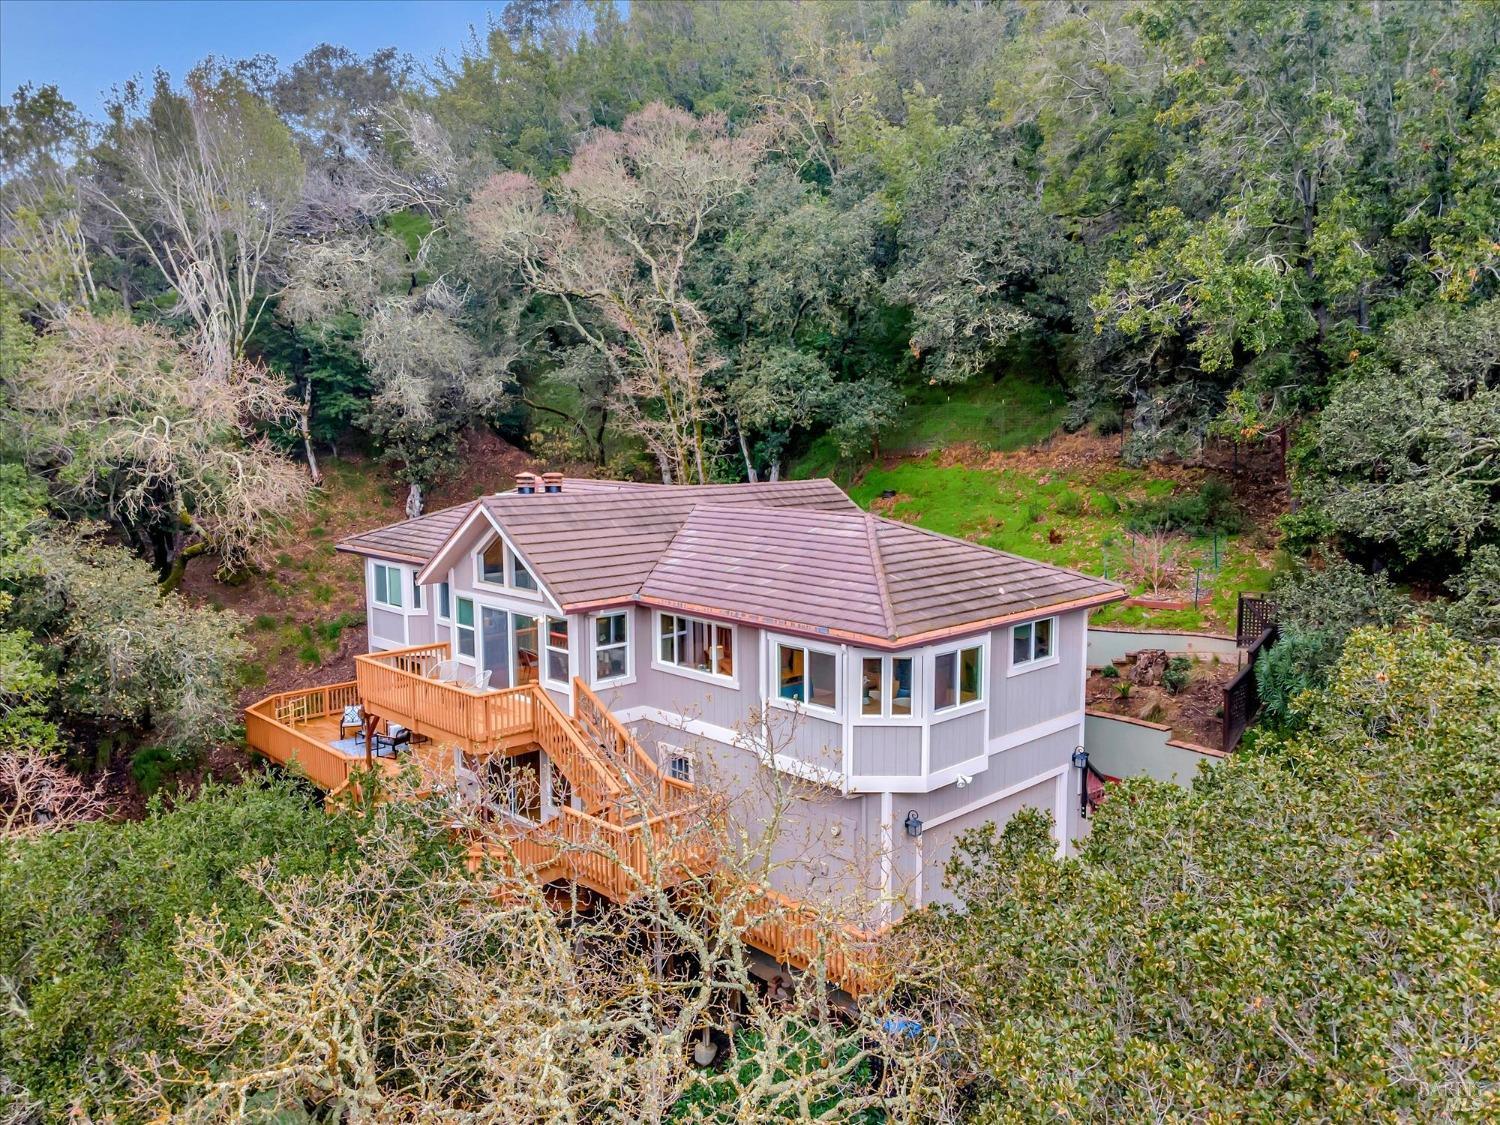 Photo of 1622 Indian Valley Rd in Novato, CA